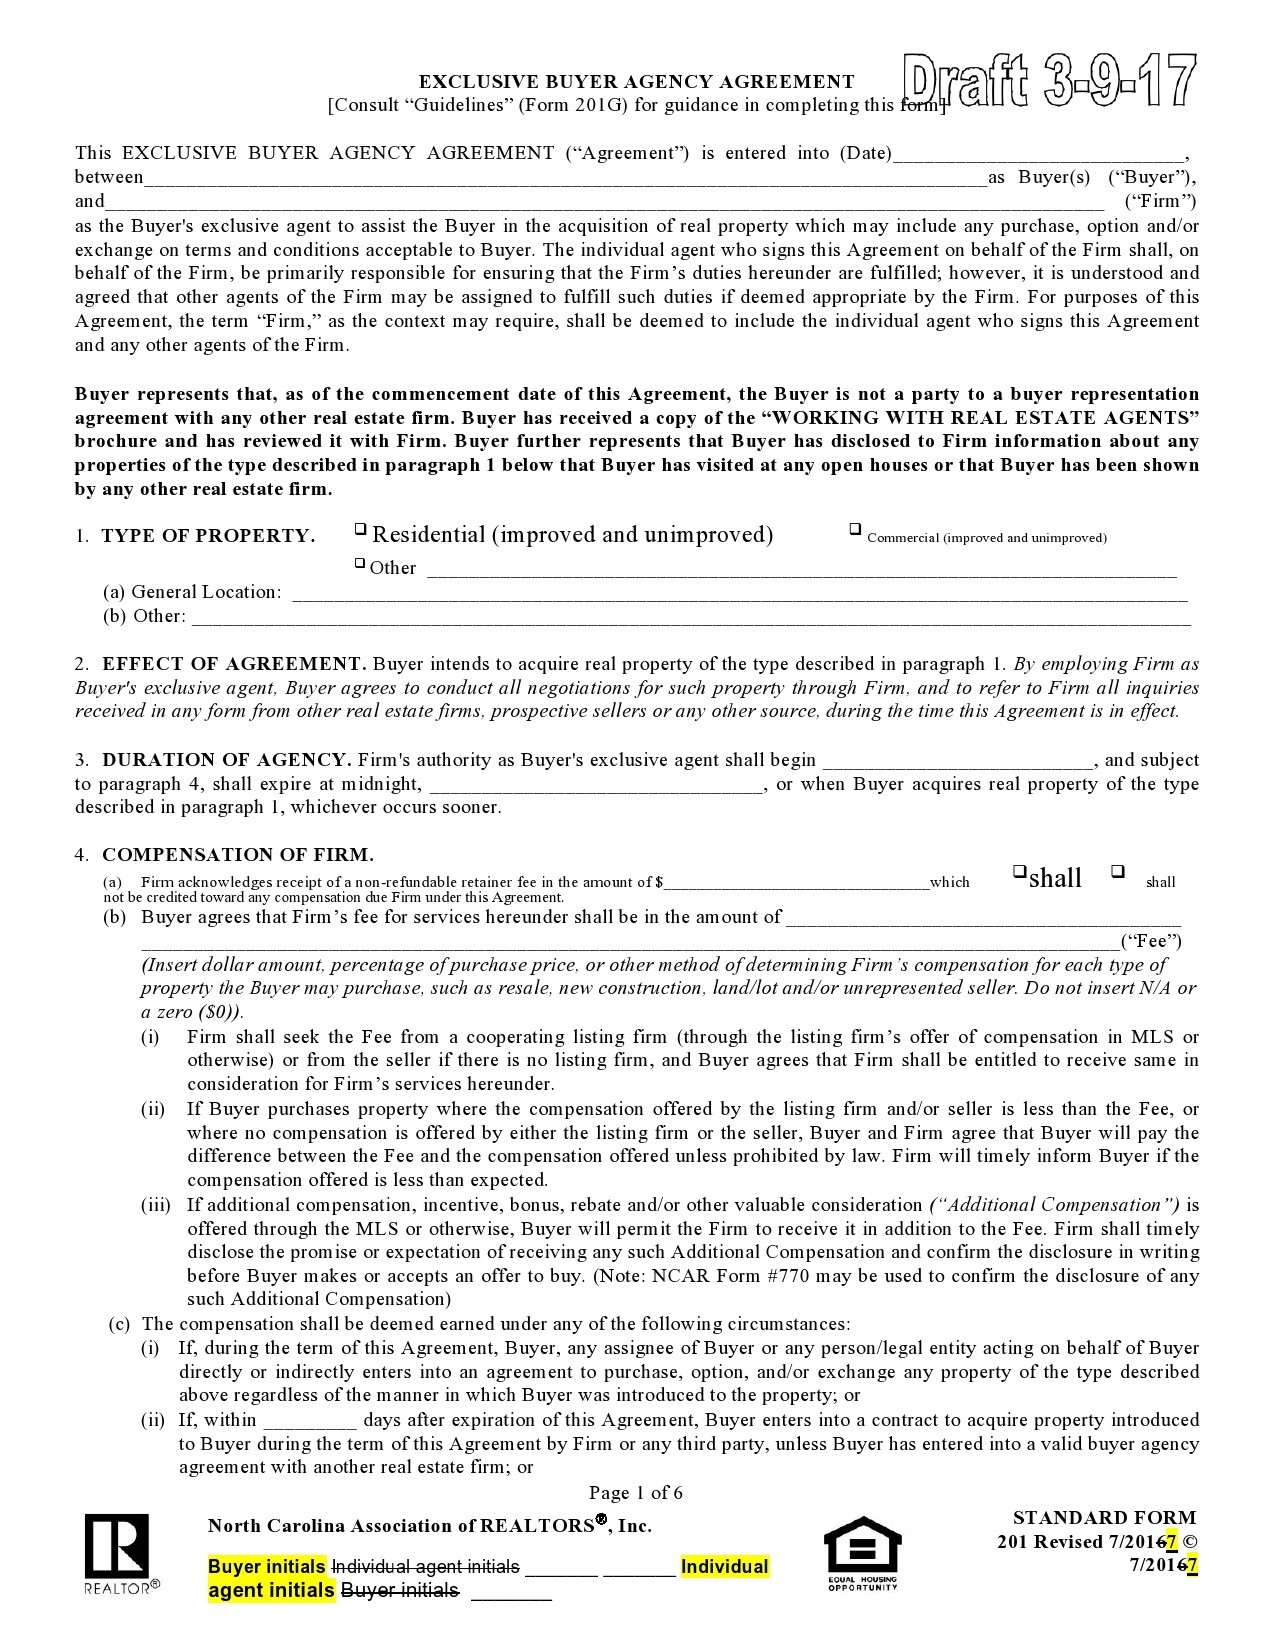 Free buyer agency agreement 10